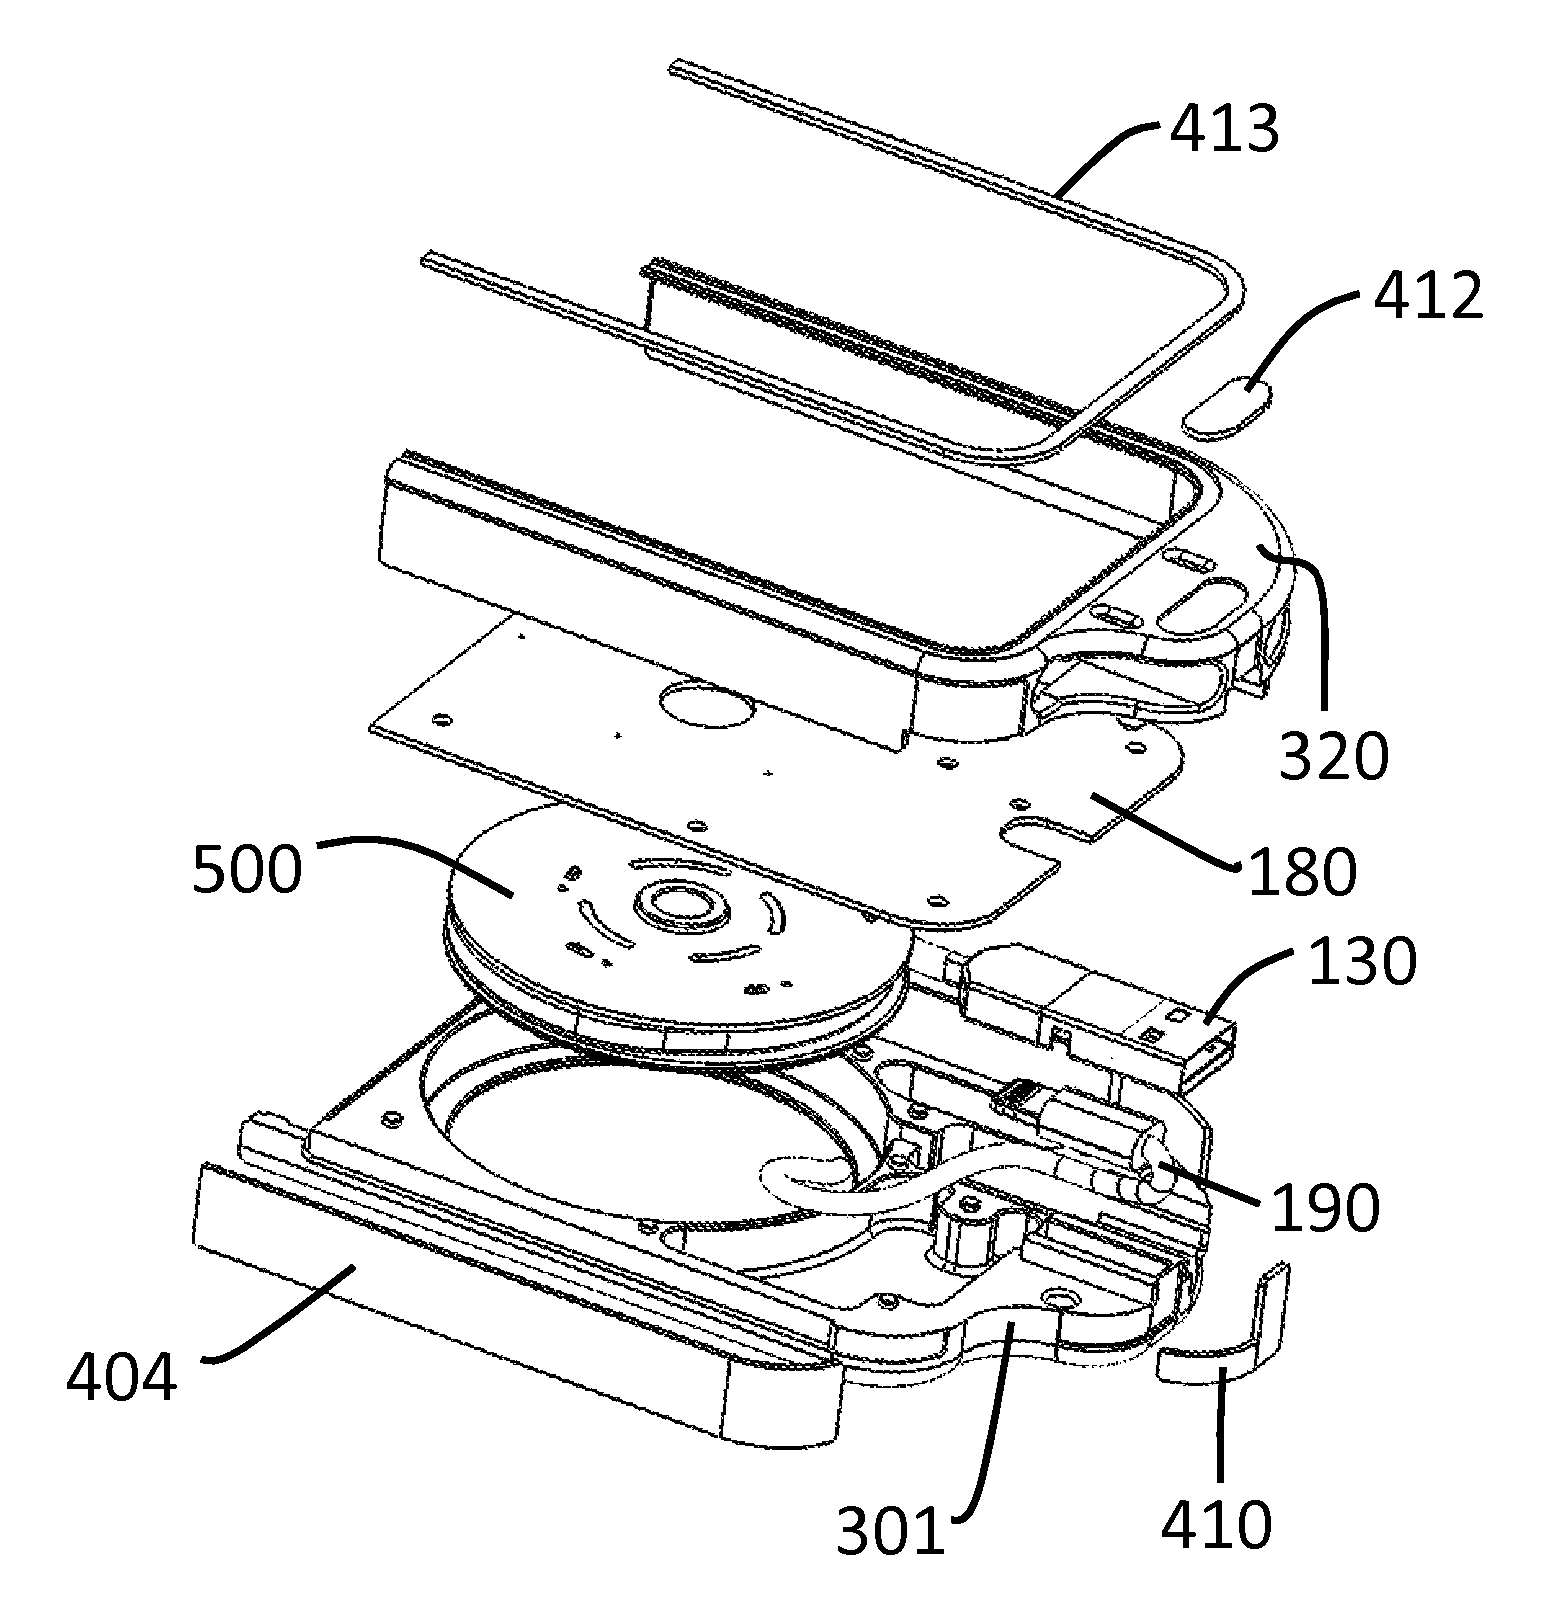 Protective case for portable electronic device with integrated dispensable and retractable charge and sync cable